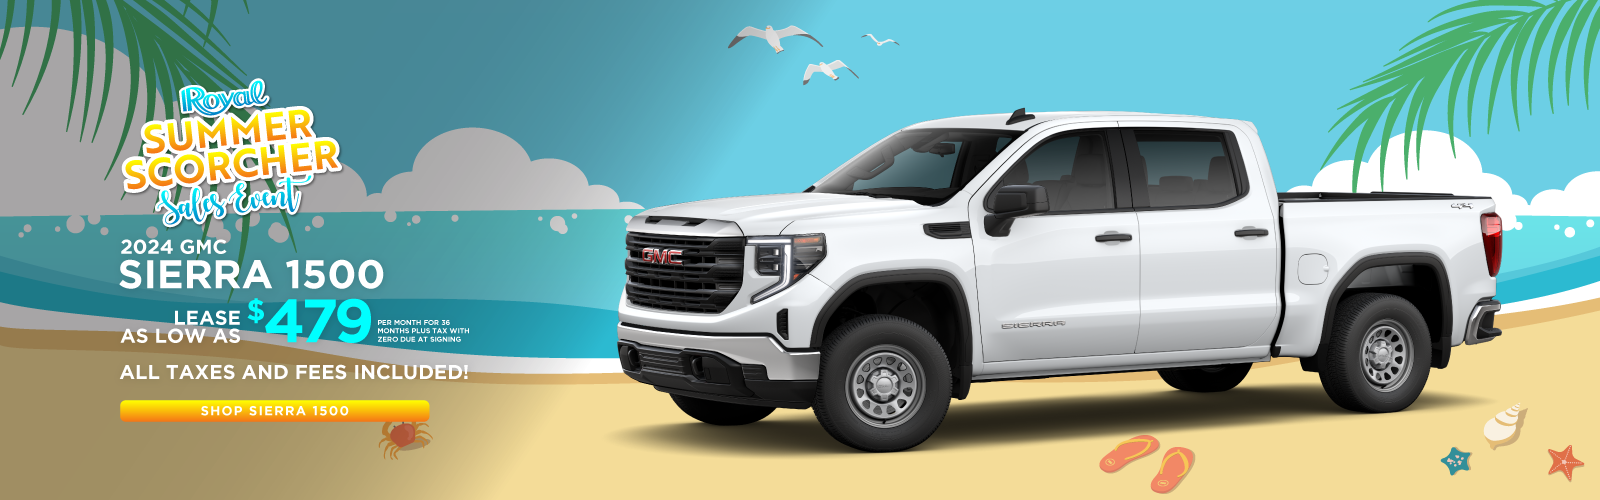 24 Sierra 1500: As low as $479/mo for 36mo, 0 due at signing